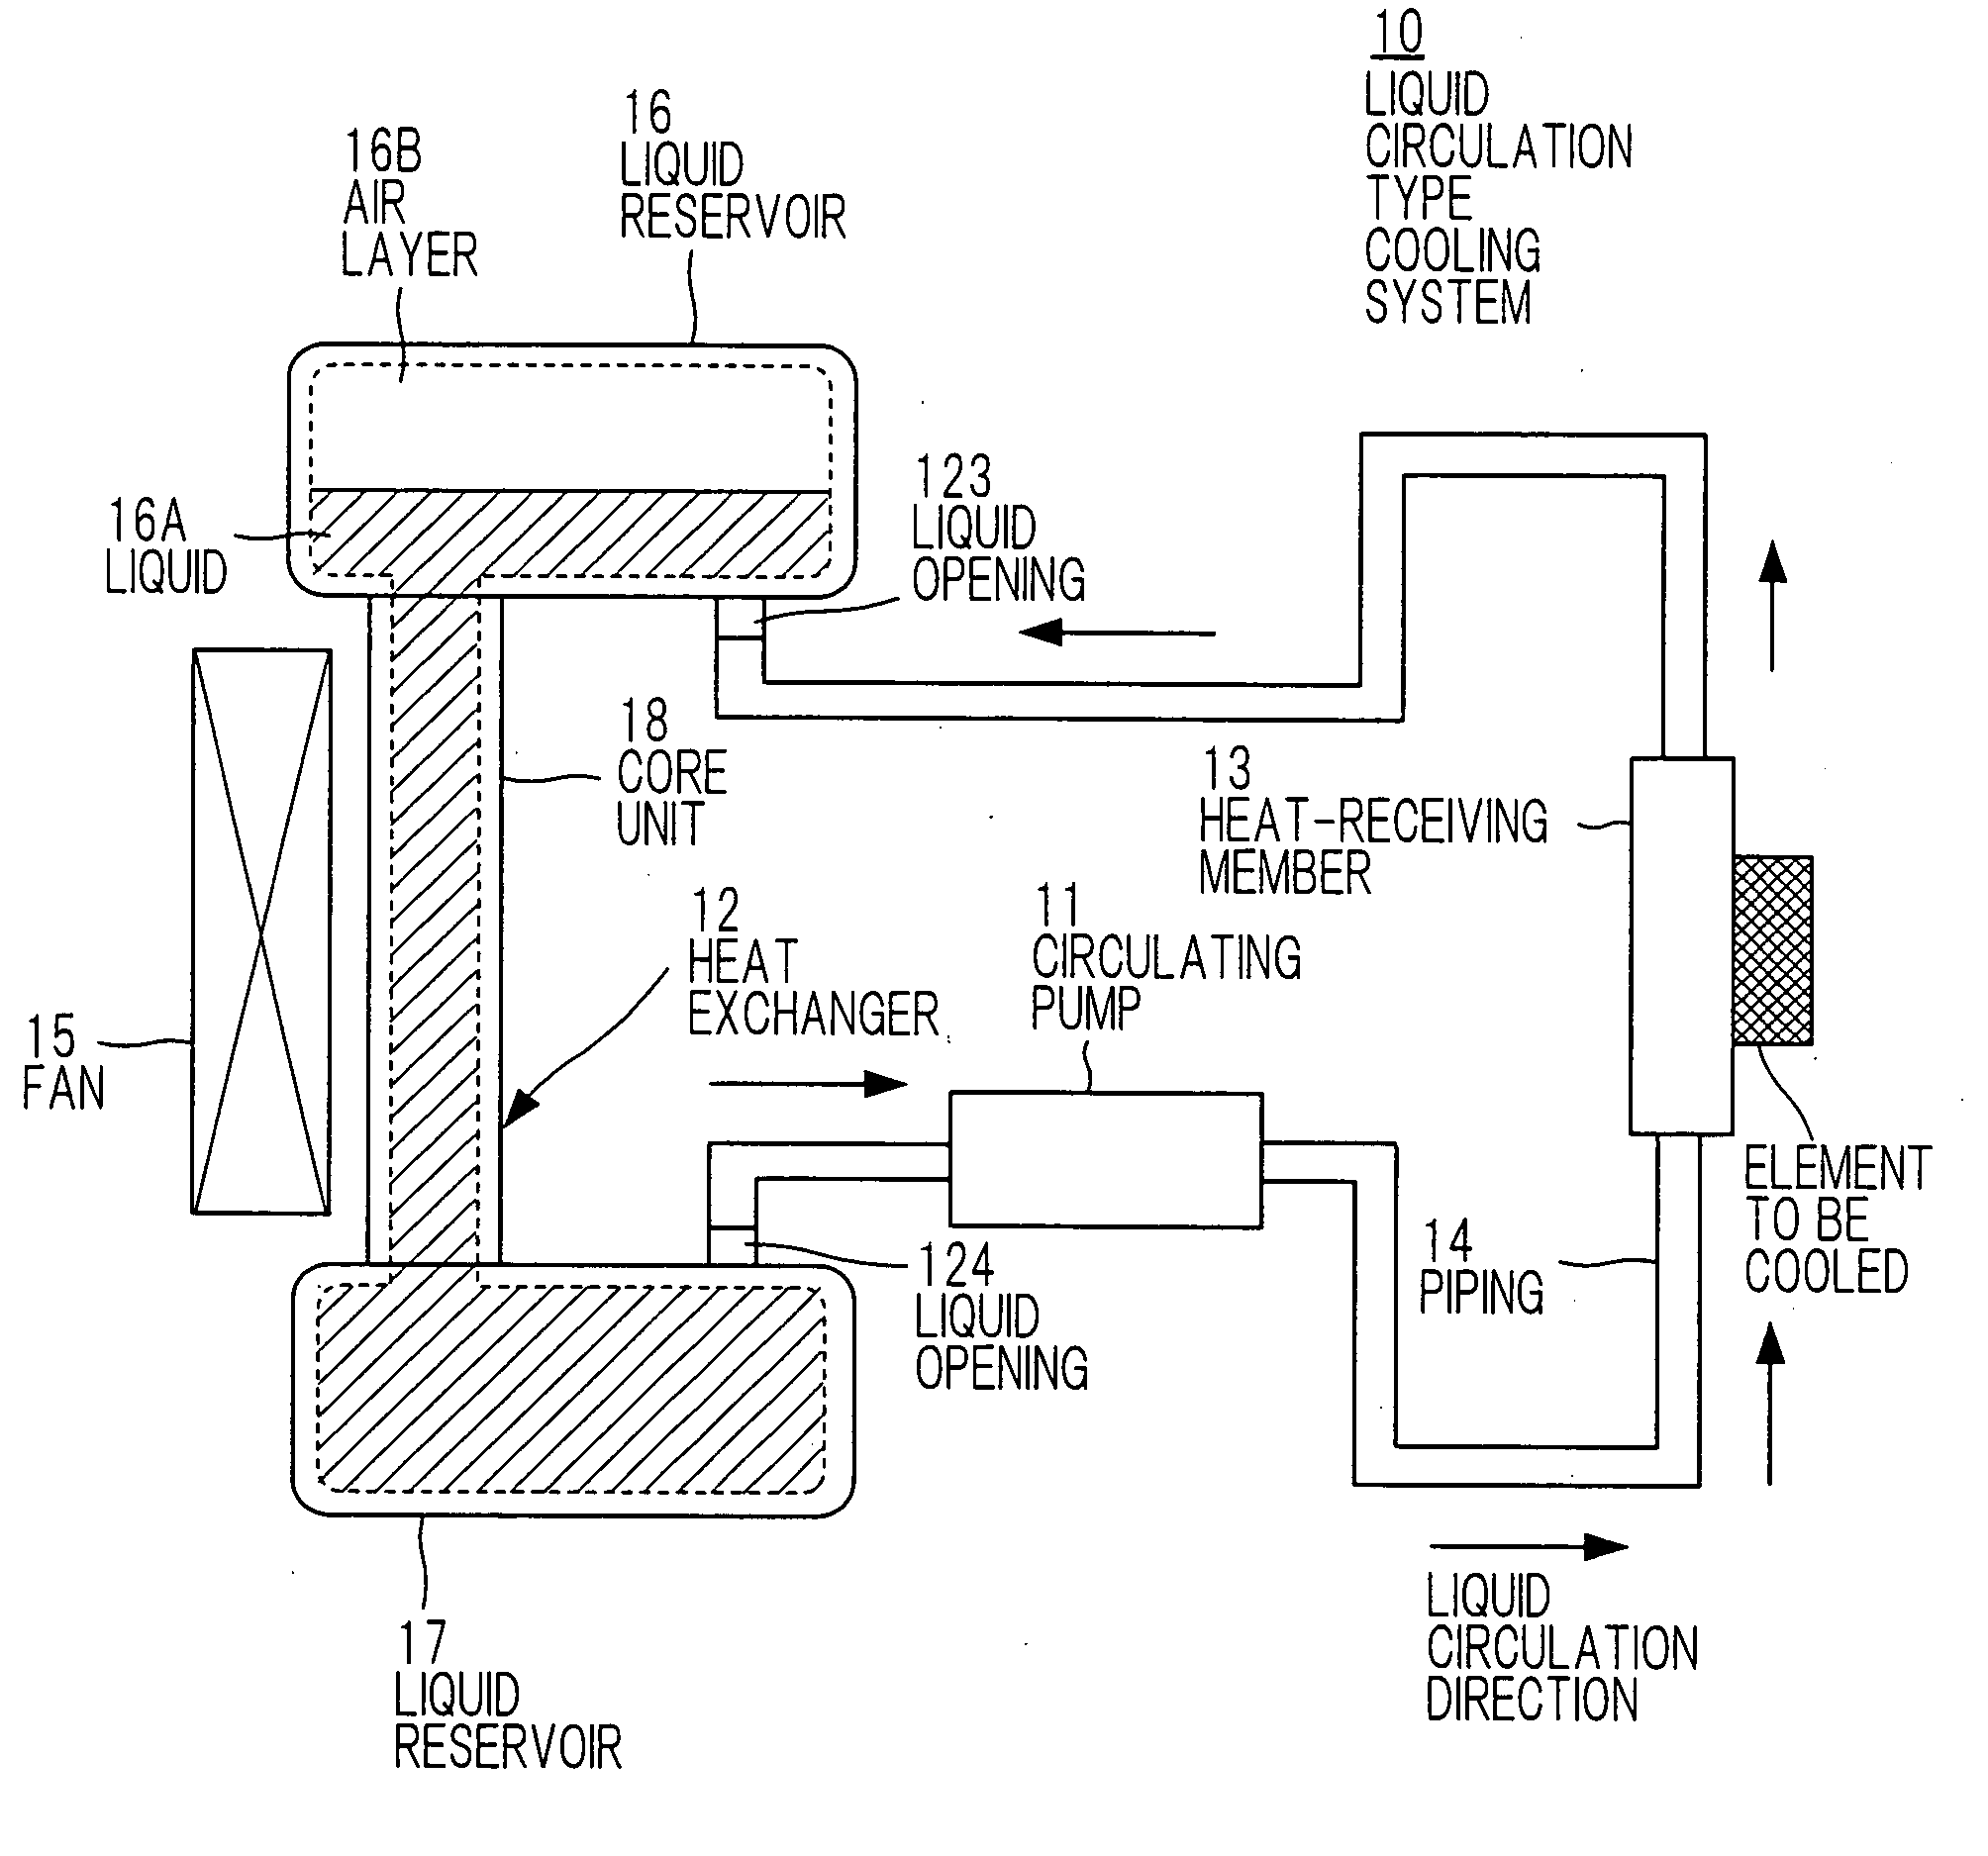 Liquid circulation type cooling system